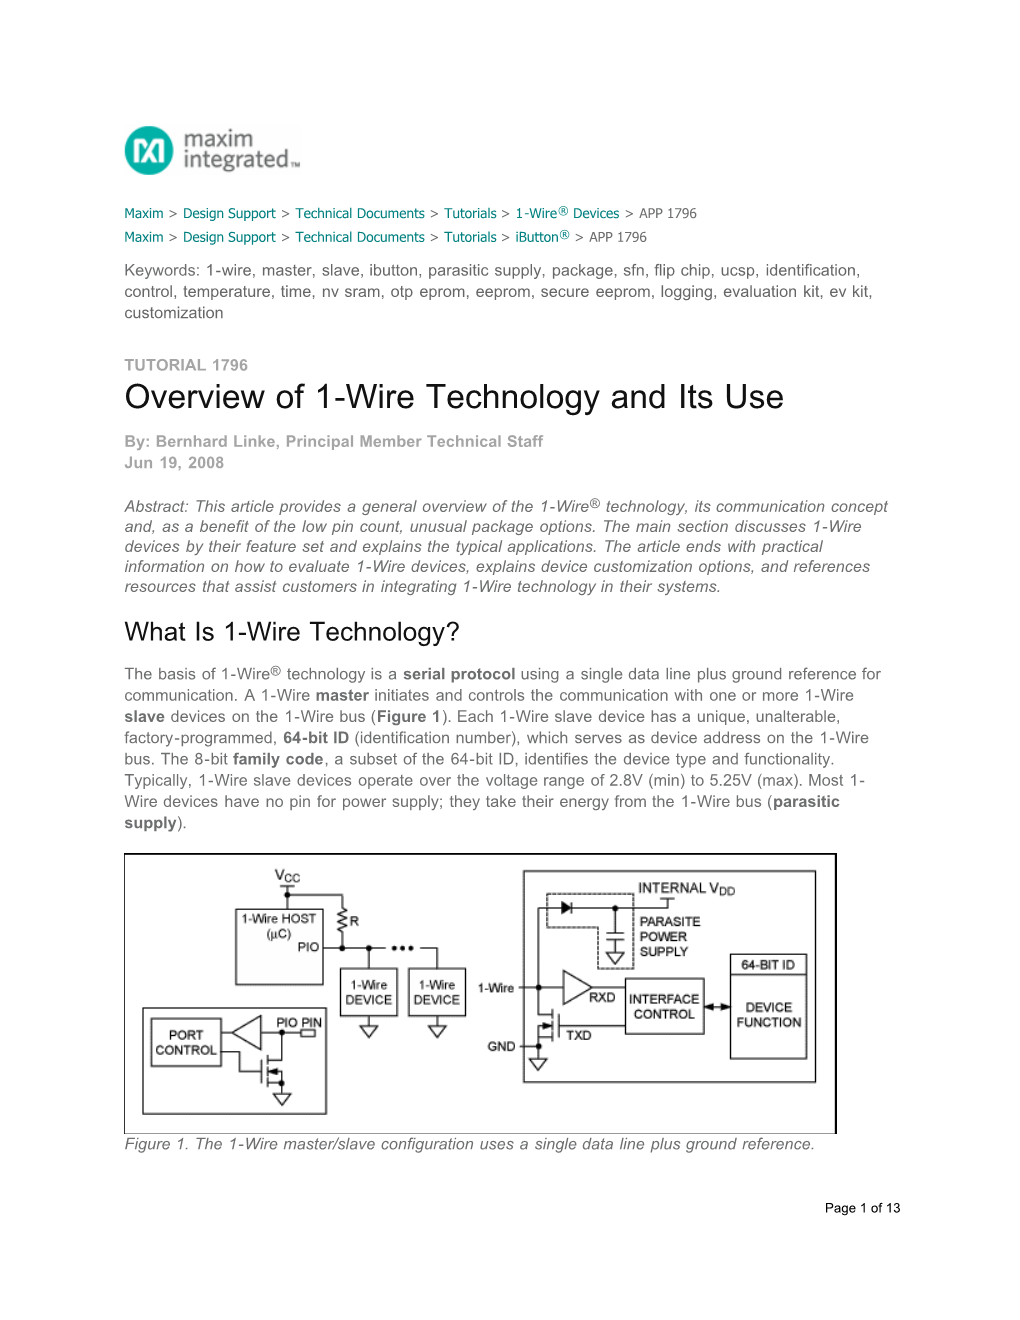 Overview of 1-Wire Technology and Its Use